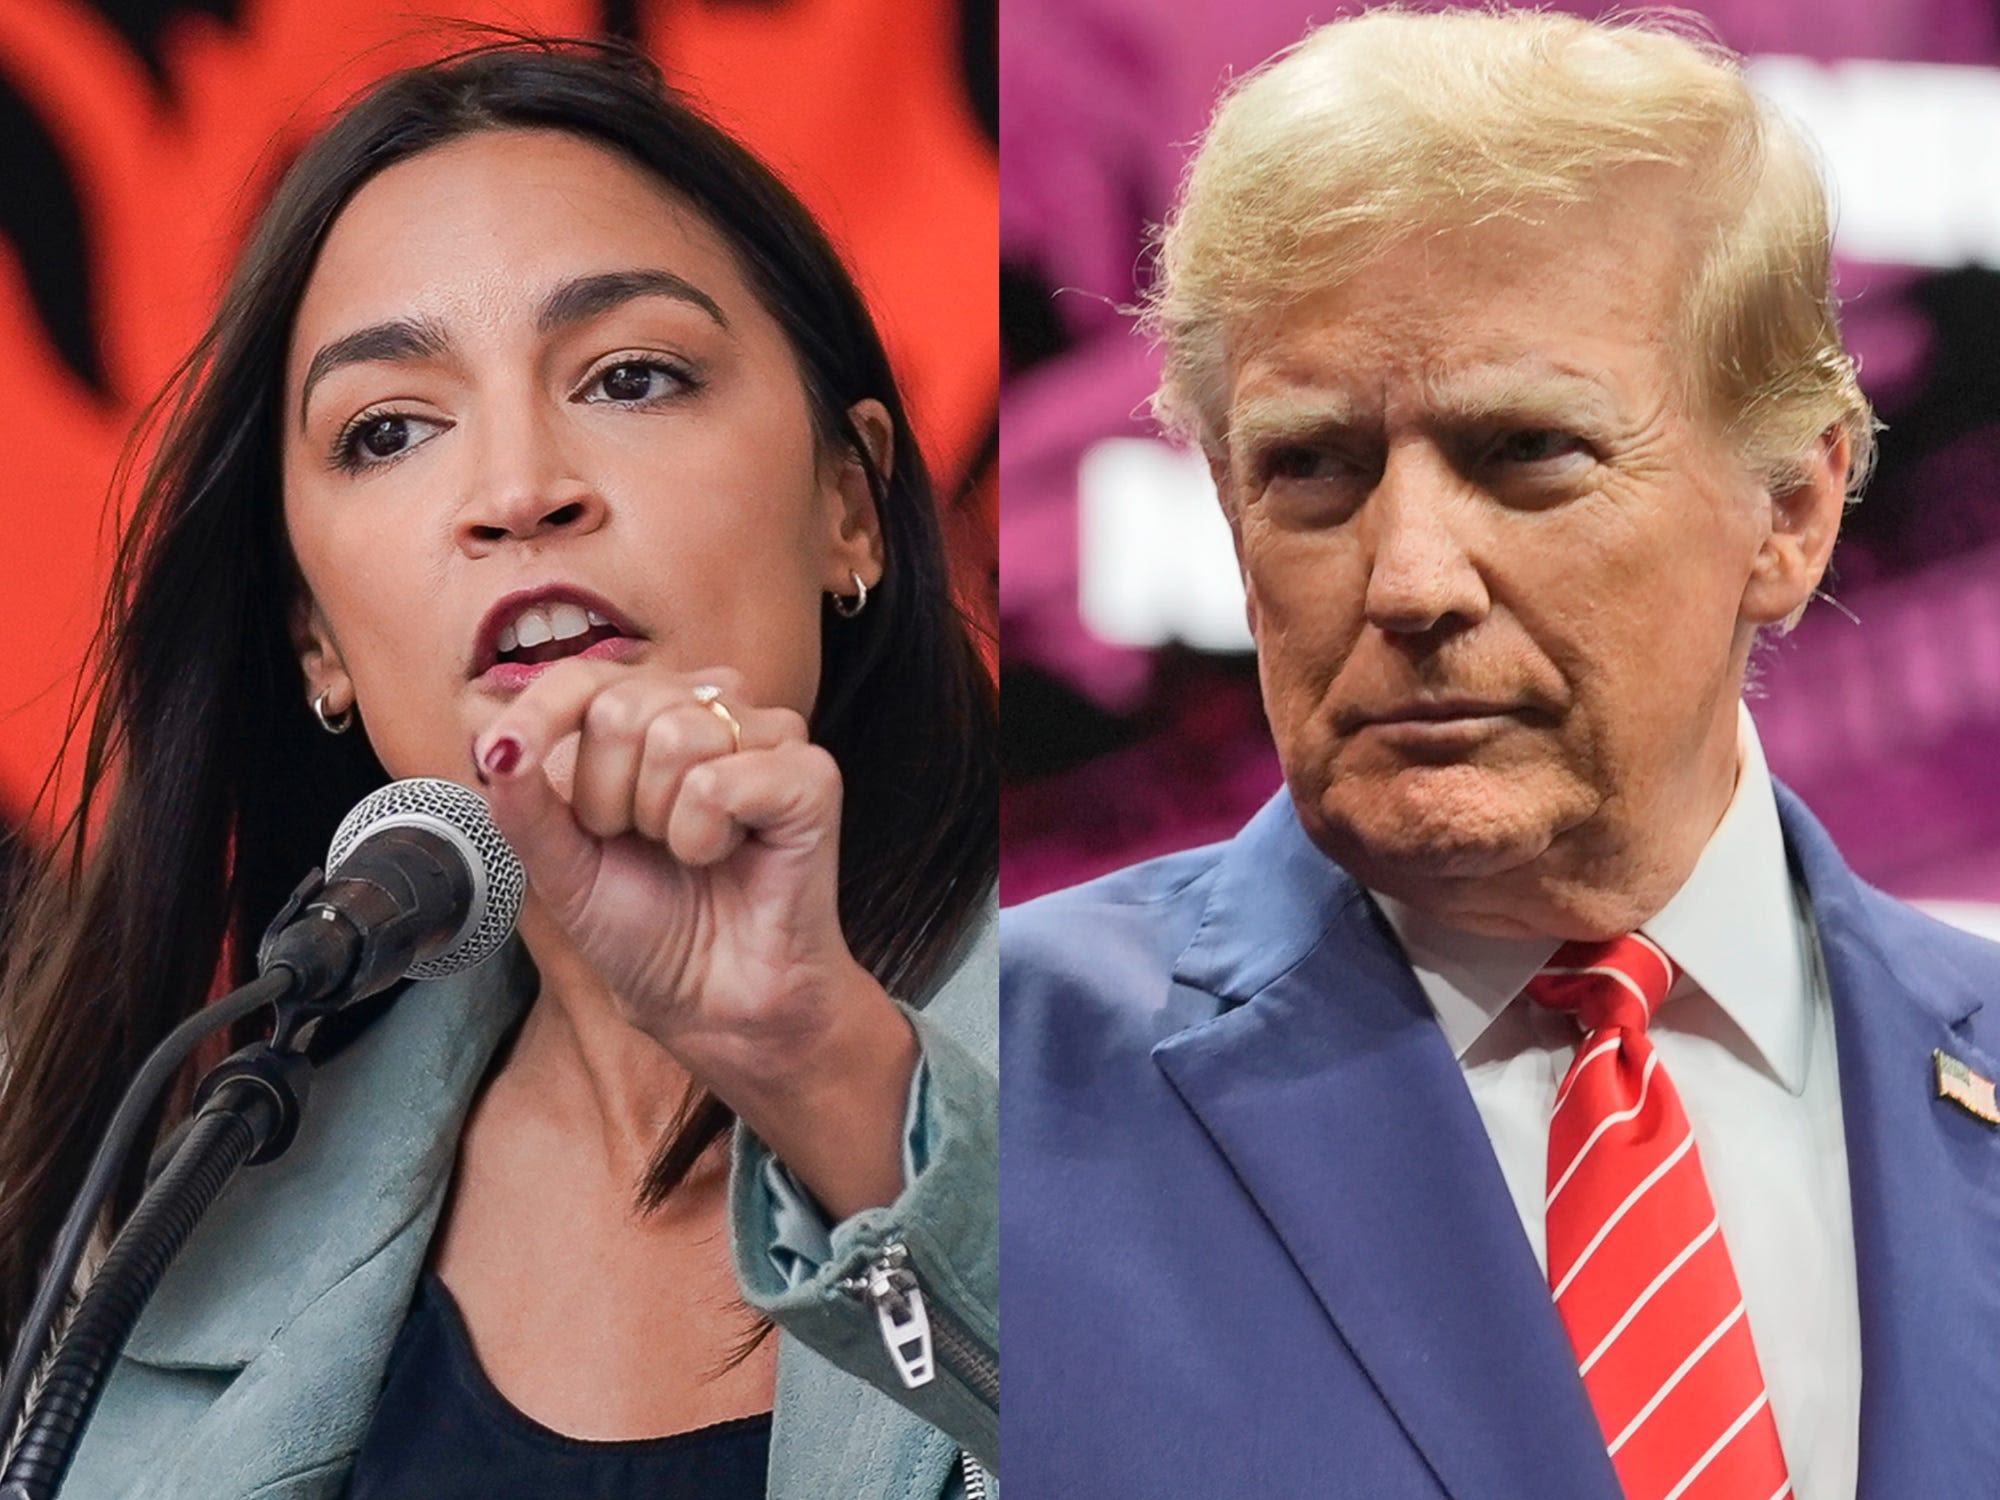 AOC says she 'wouldn't be surprised' if Trump 'threw me in jail' if he wins in 2024